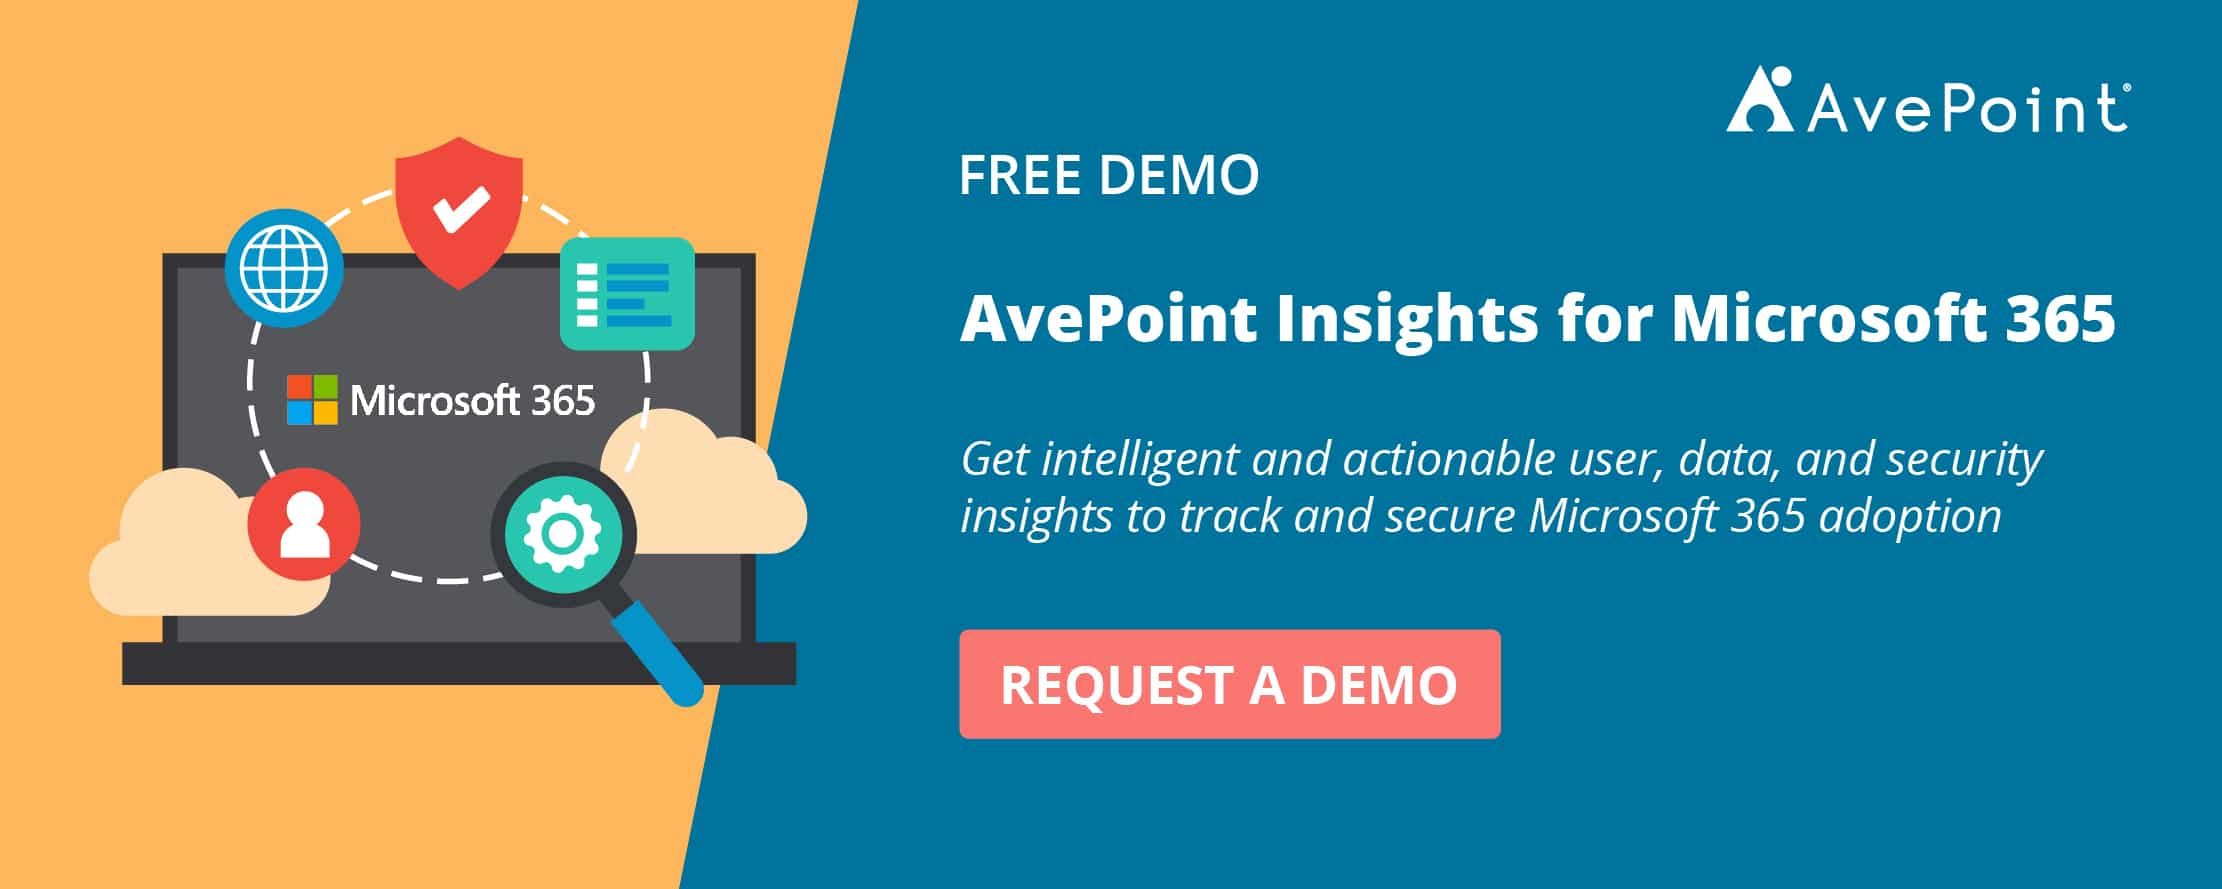 avepoint-insights-request-demo